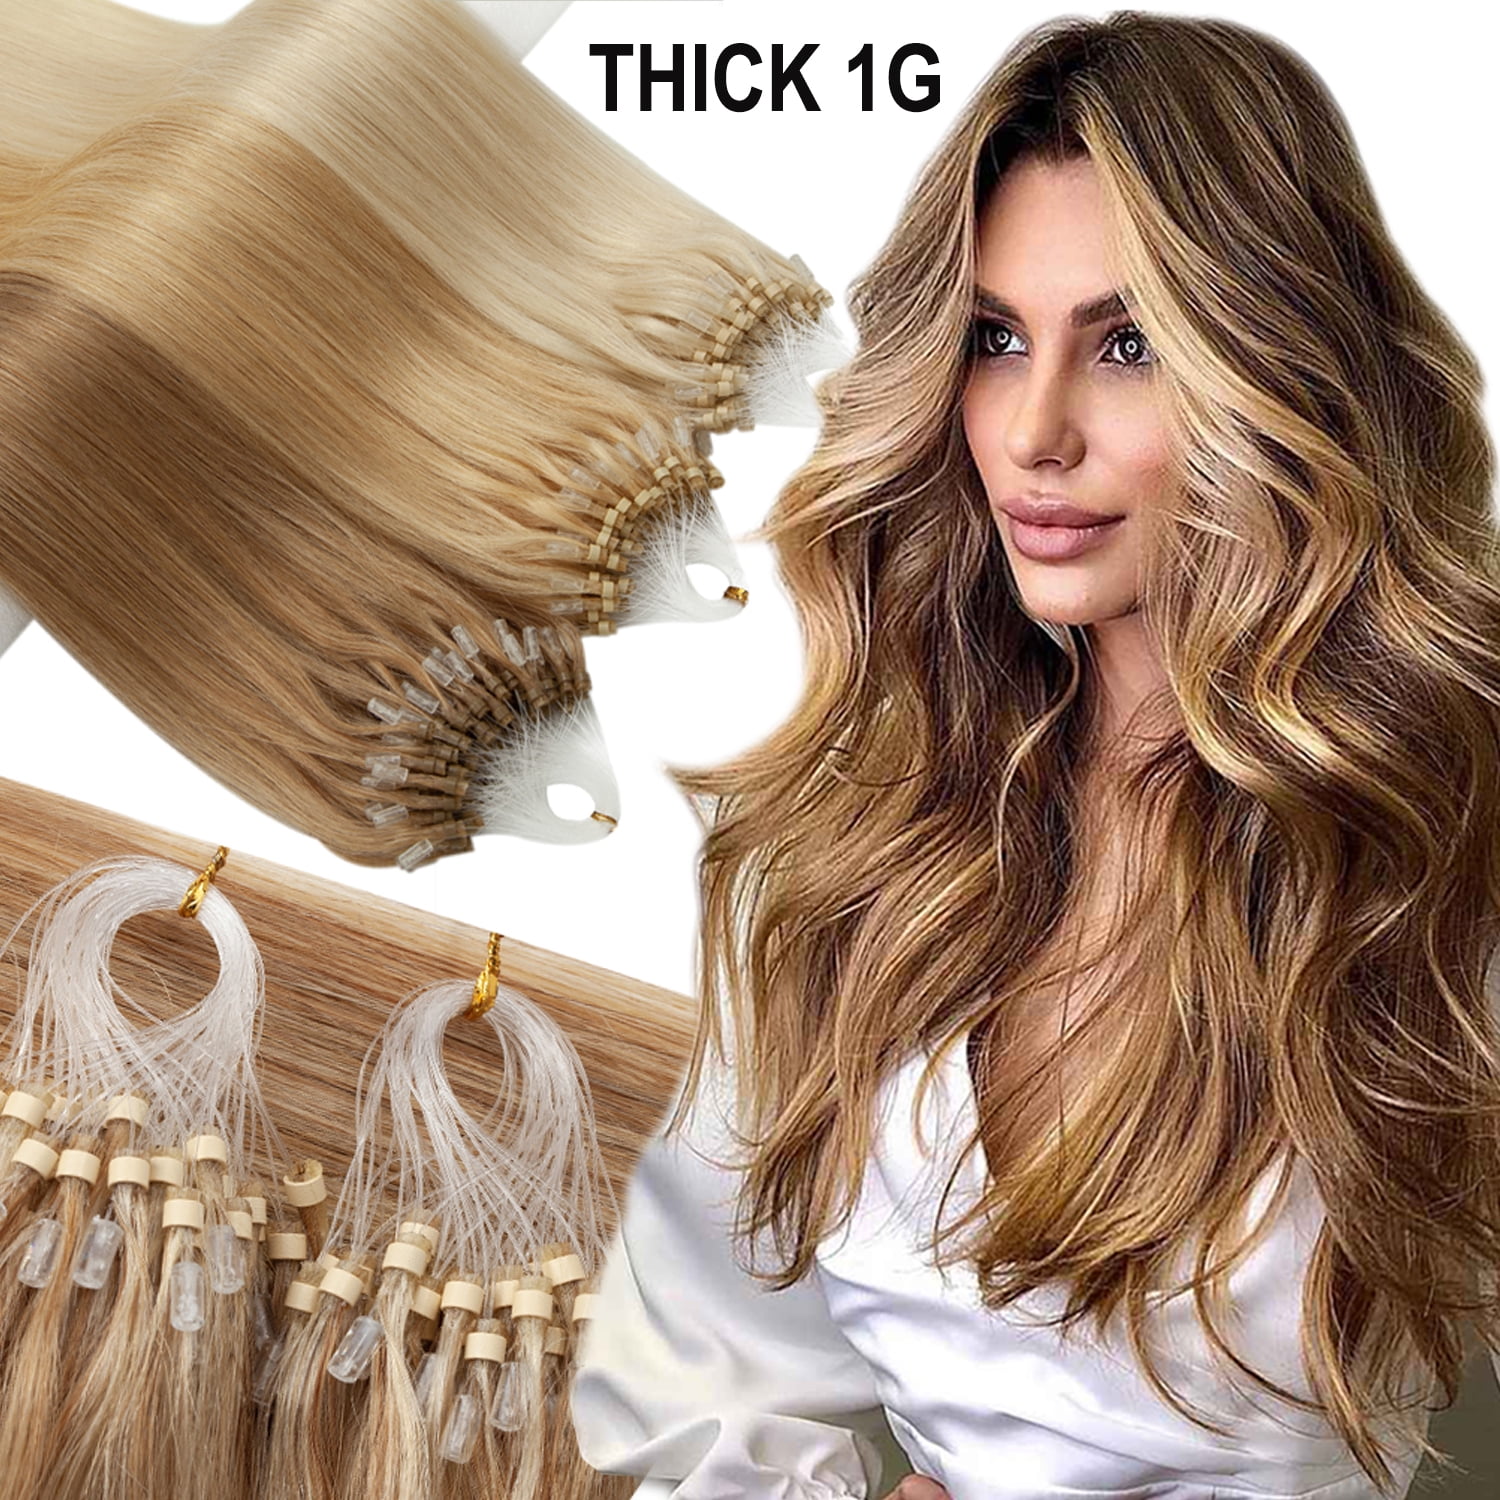 White Blonde #60 Micro Ring Beads Remy Human Hair Extensions, 20 / 100g / Blonde